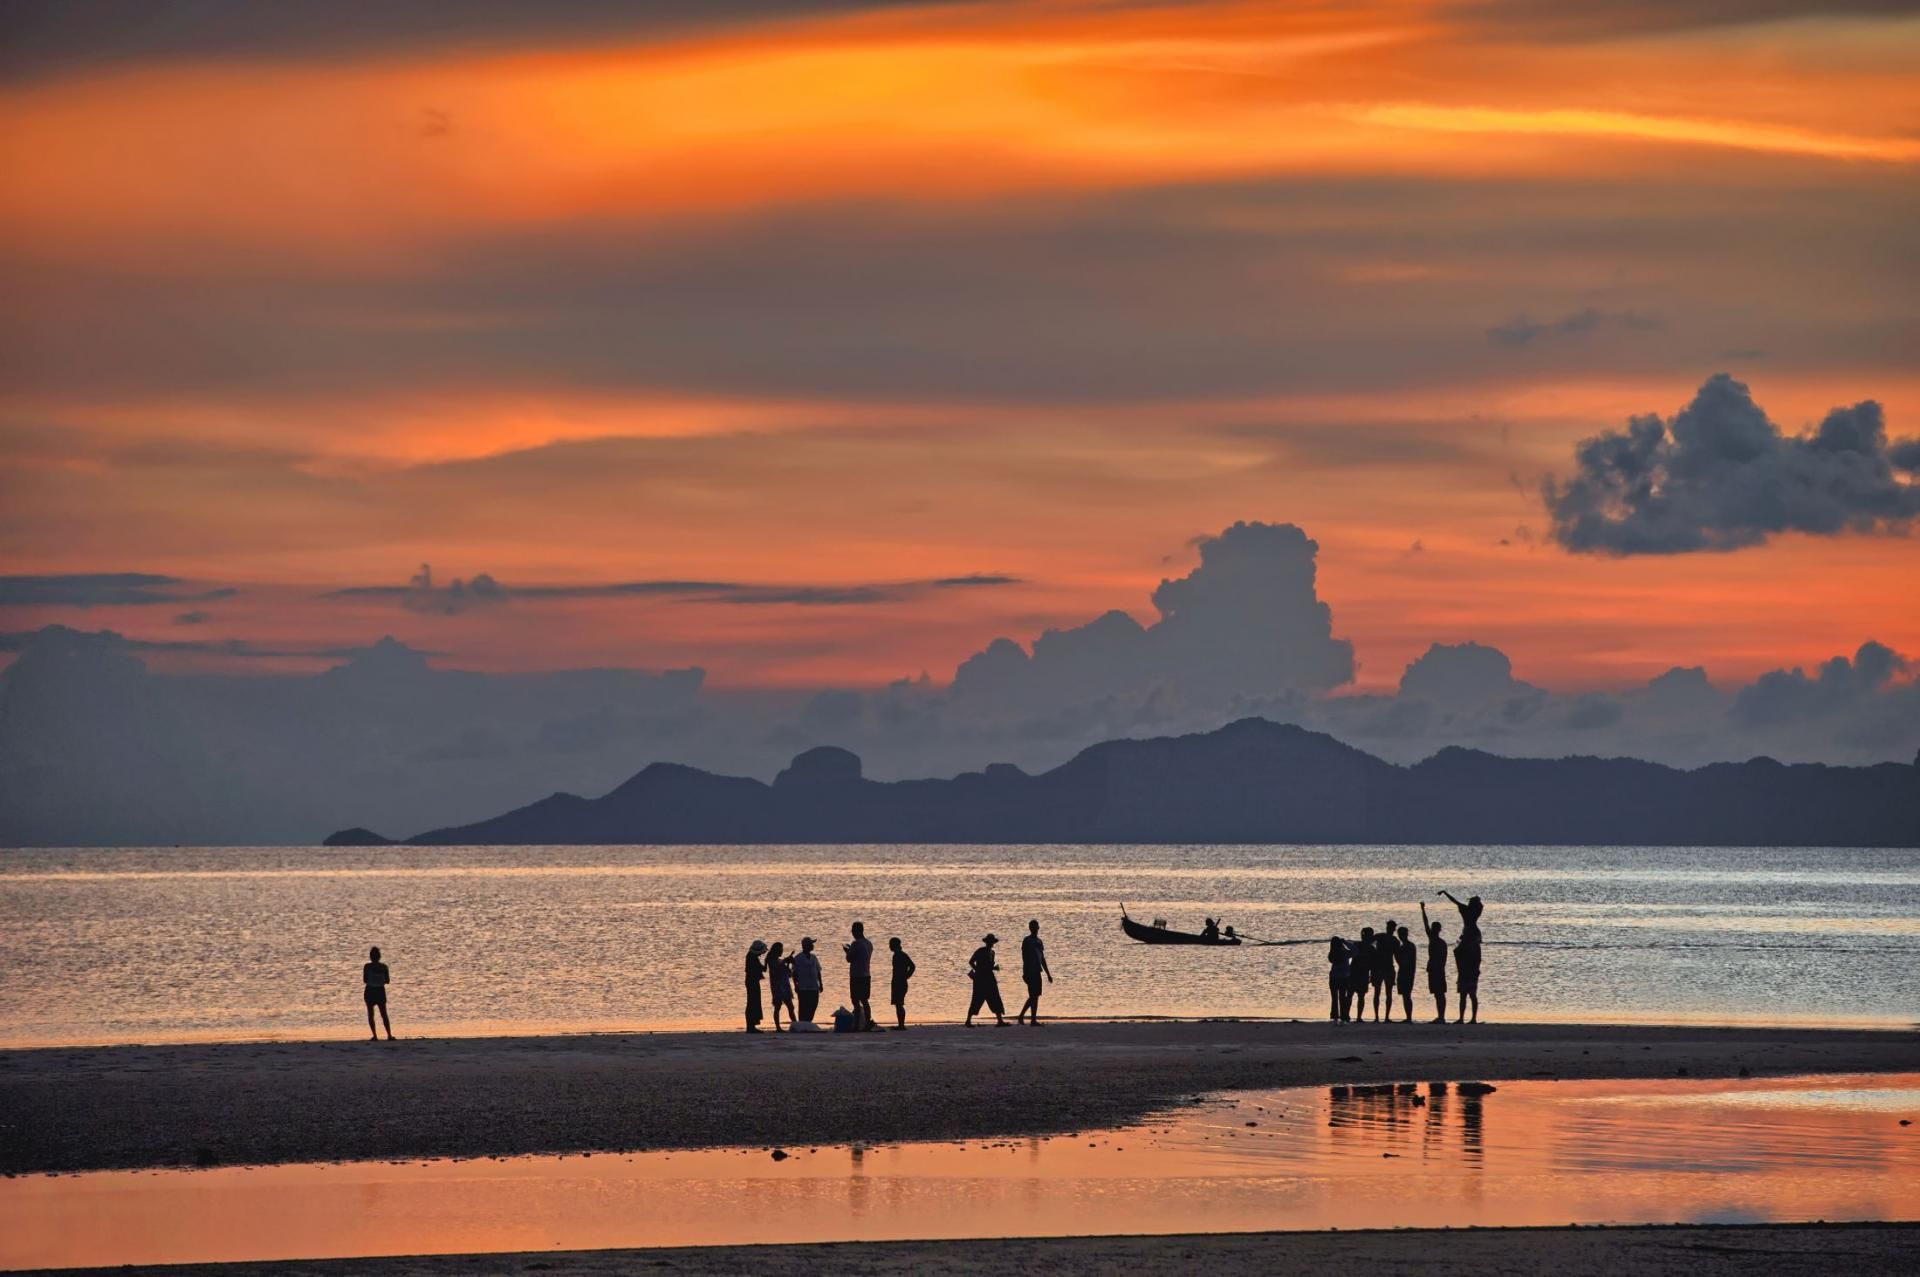 A shot of a beautiful beach in Thailand at sunset. The Beaches are one of the best places in Thailand for couples, and this would be a great place to propose in Koh Samui.